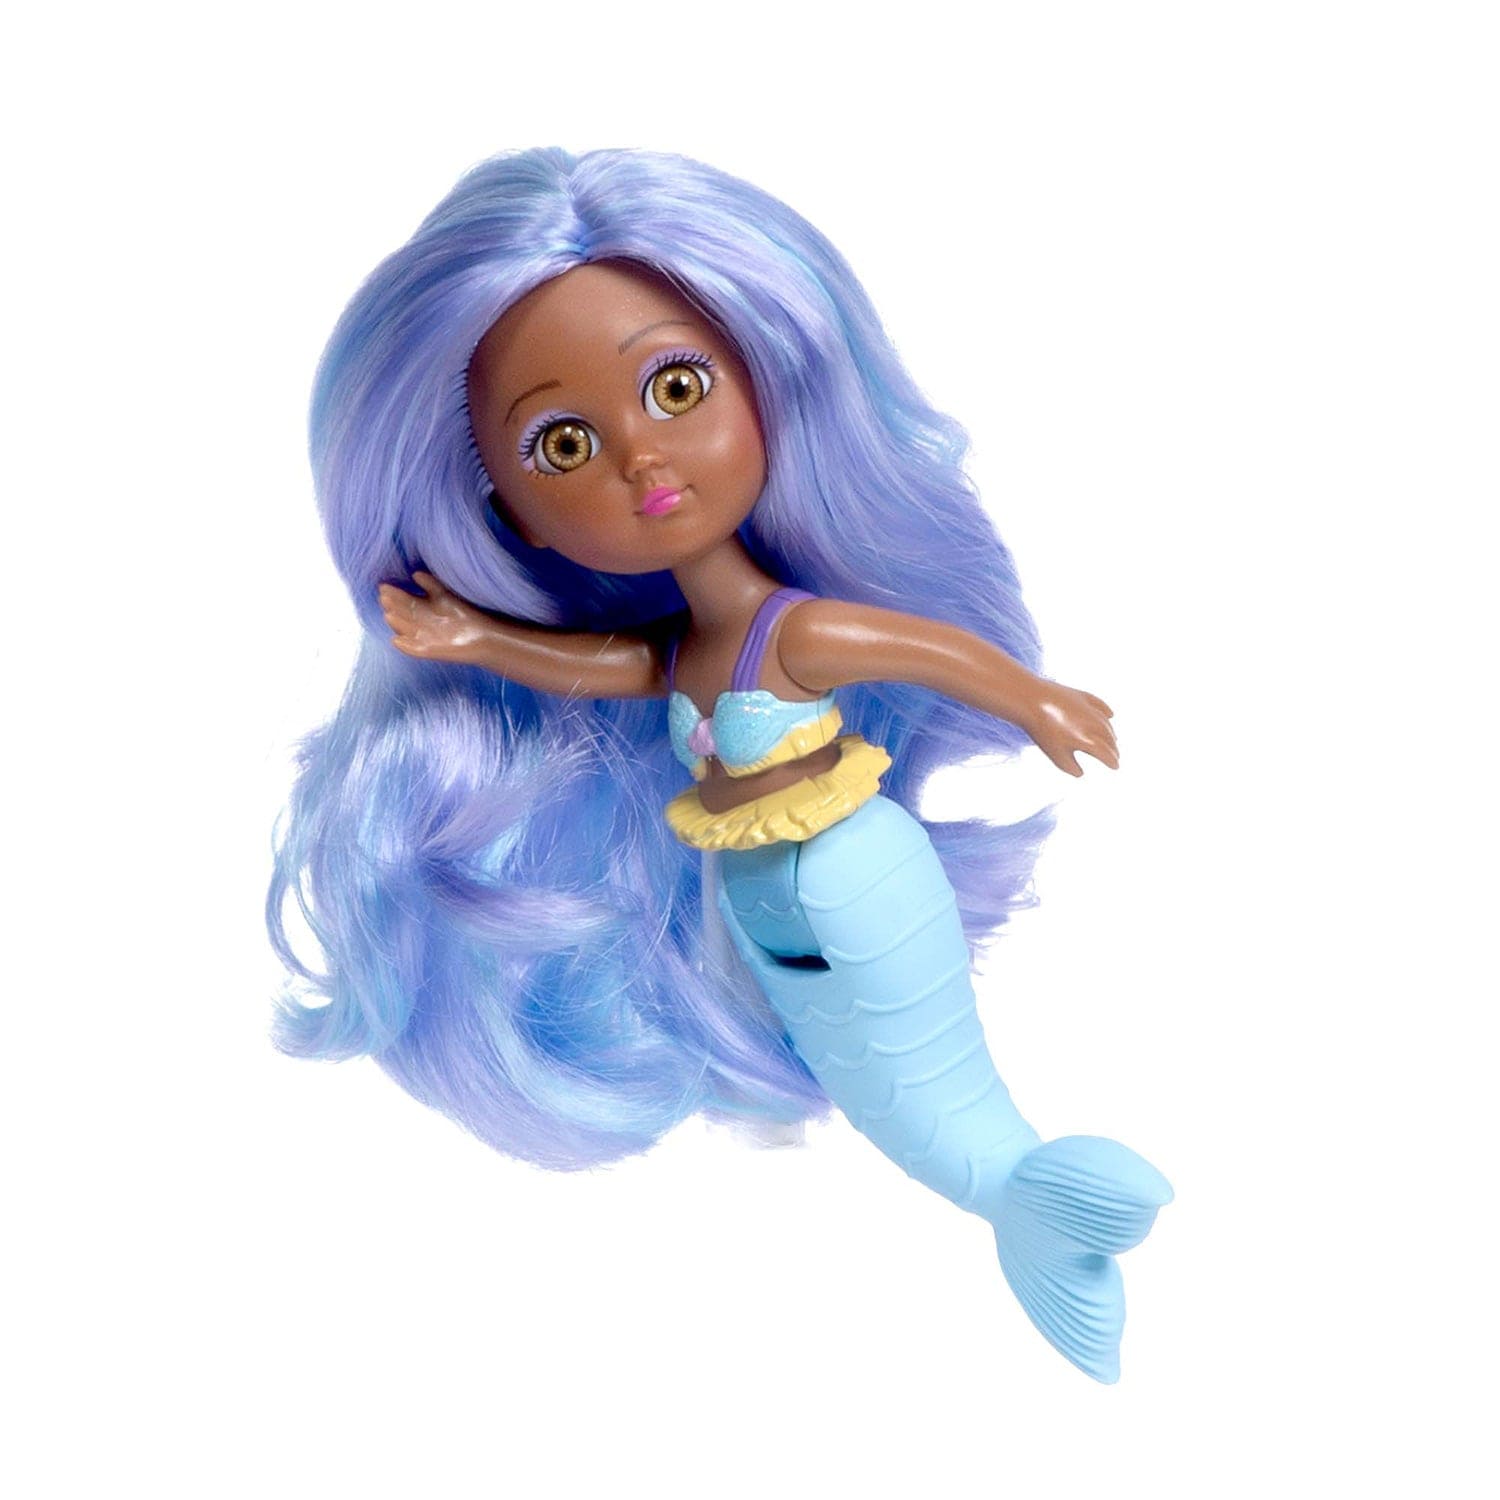 Water Wonder Oceana mermaid doll has light purple hair with blue highlights, a glittery blue bikini top, and yellow ruffle accents. Her beautiful mermaid doll tail changes from light blue to purple when she’s swimming in cold water. Ages 1+.